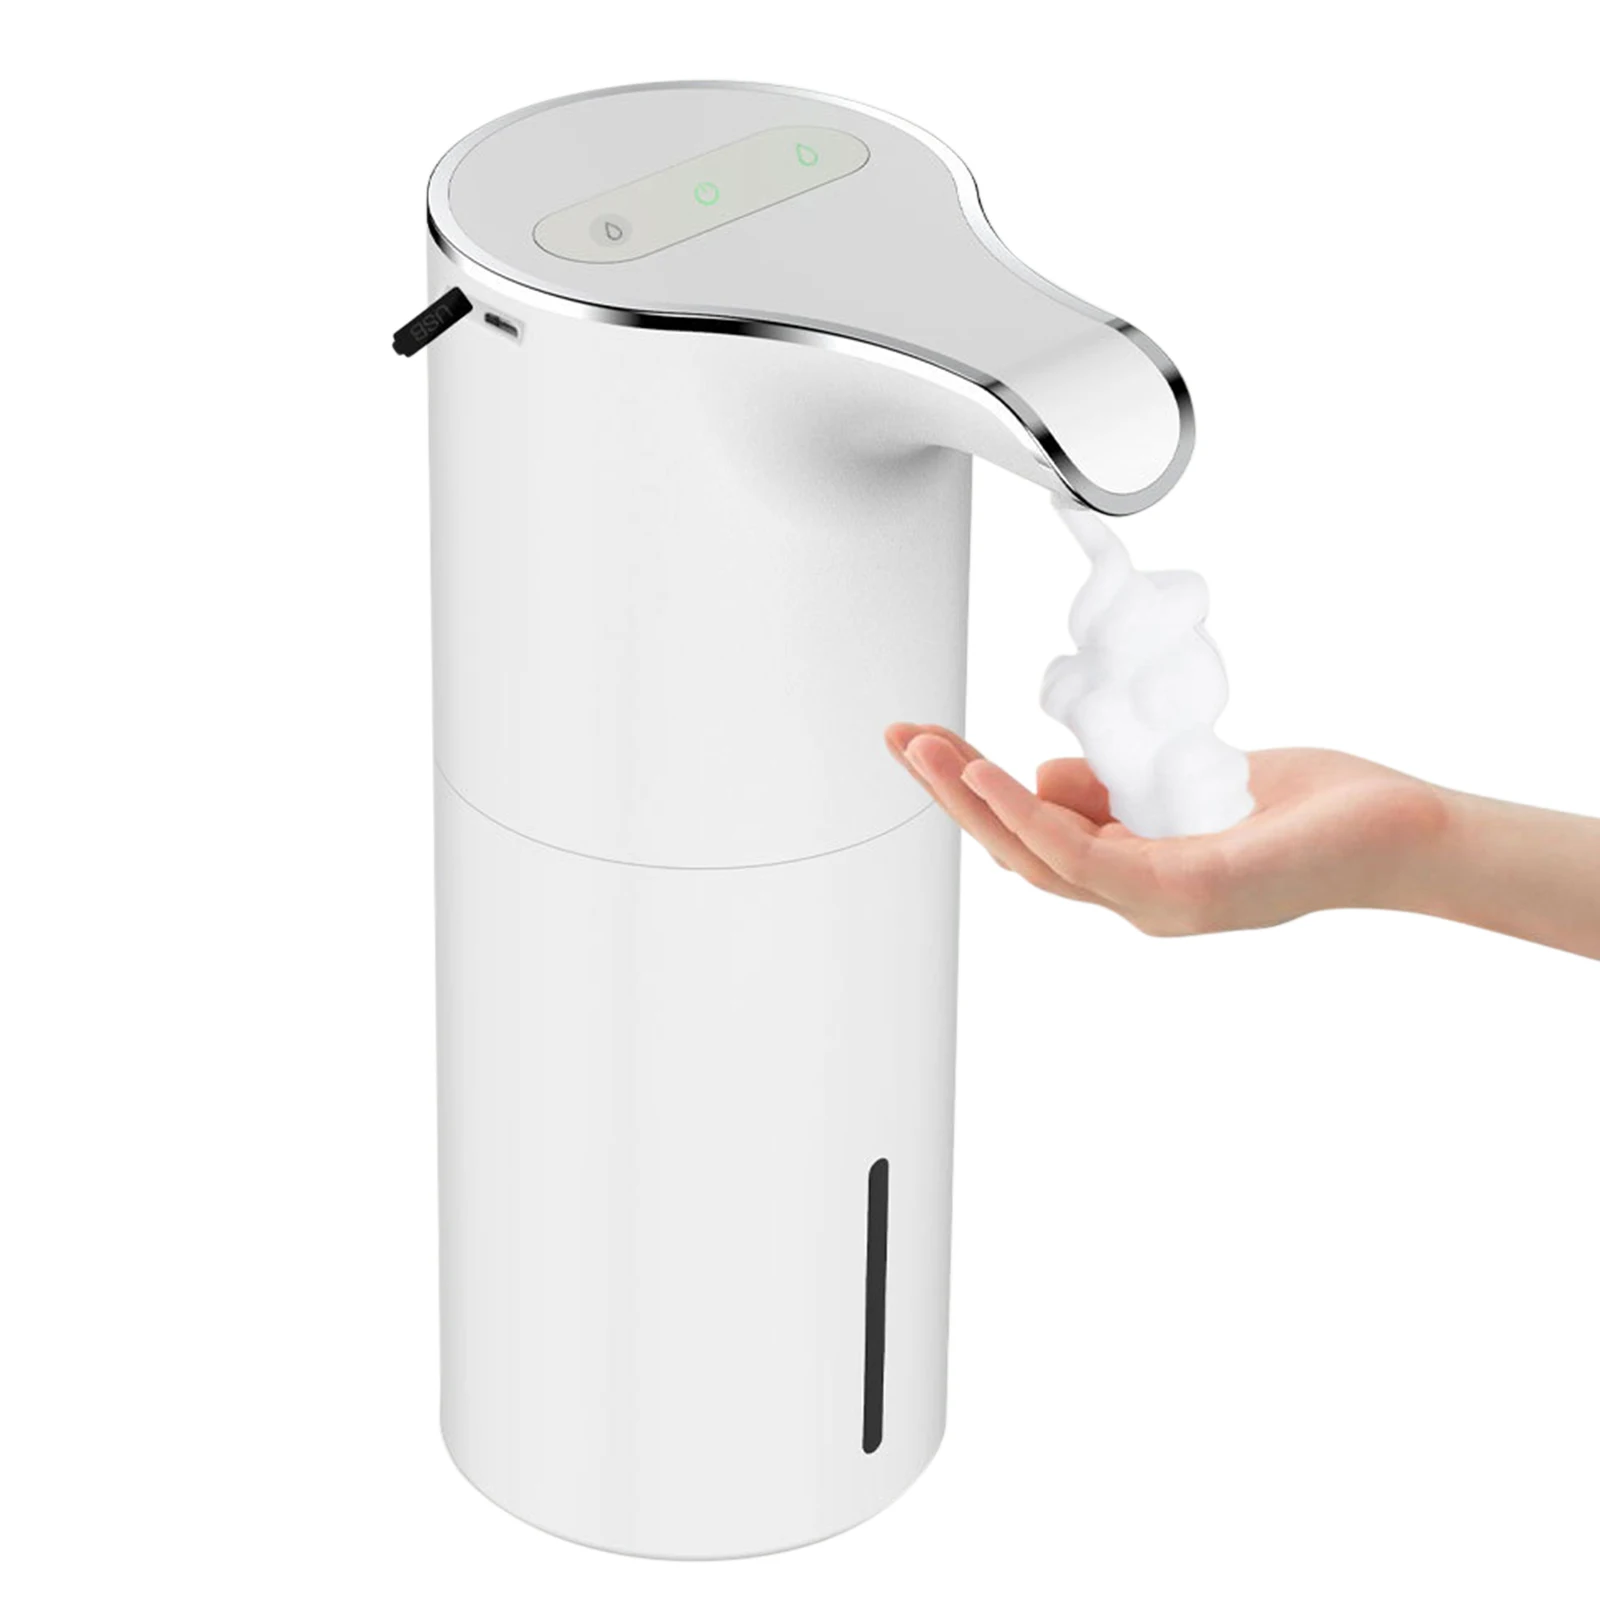 

Automatic Soap Dispenser Rechargeable Touchless Foaming Infrared Motion Sensor Hand Sanitizer for Bathroom Kitchen Countertop